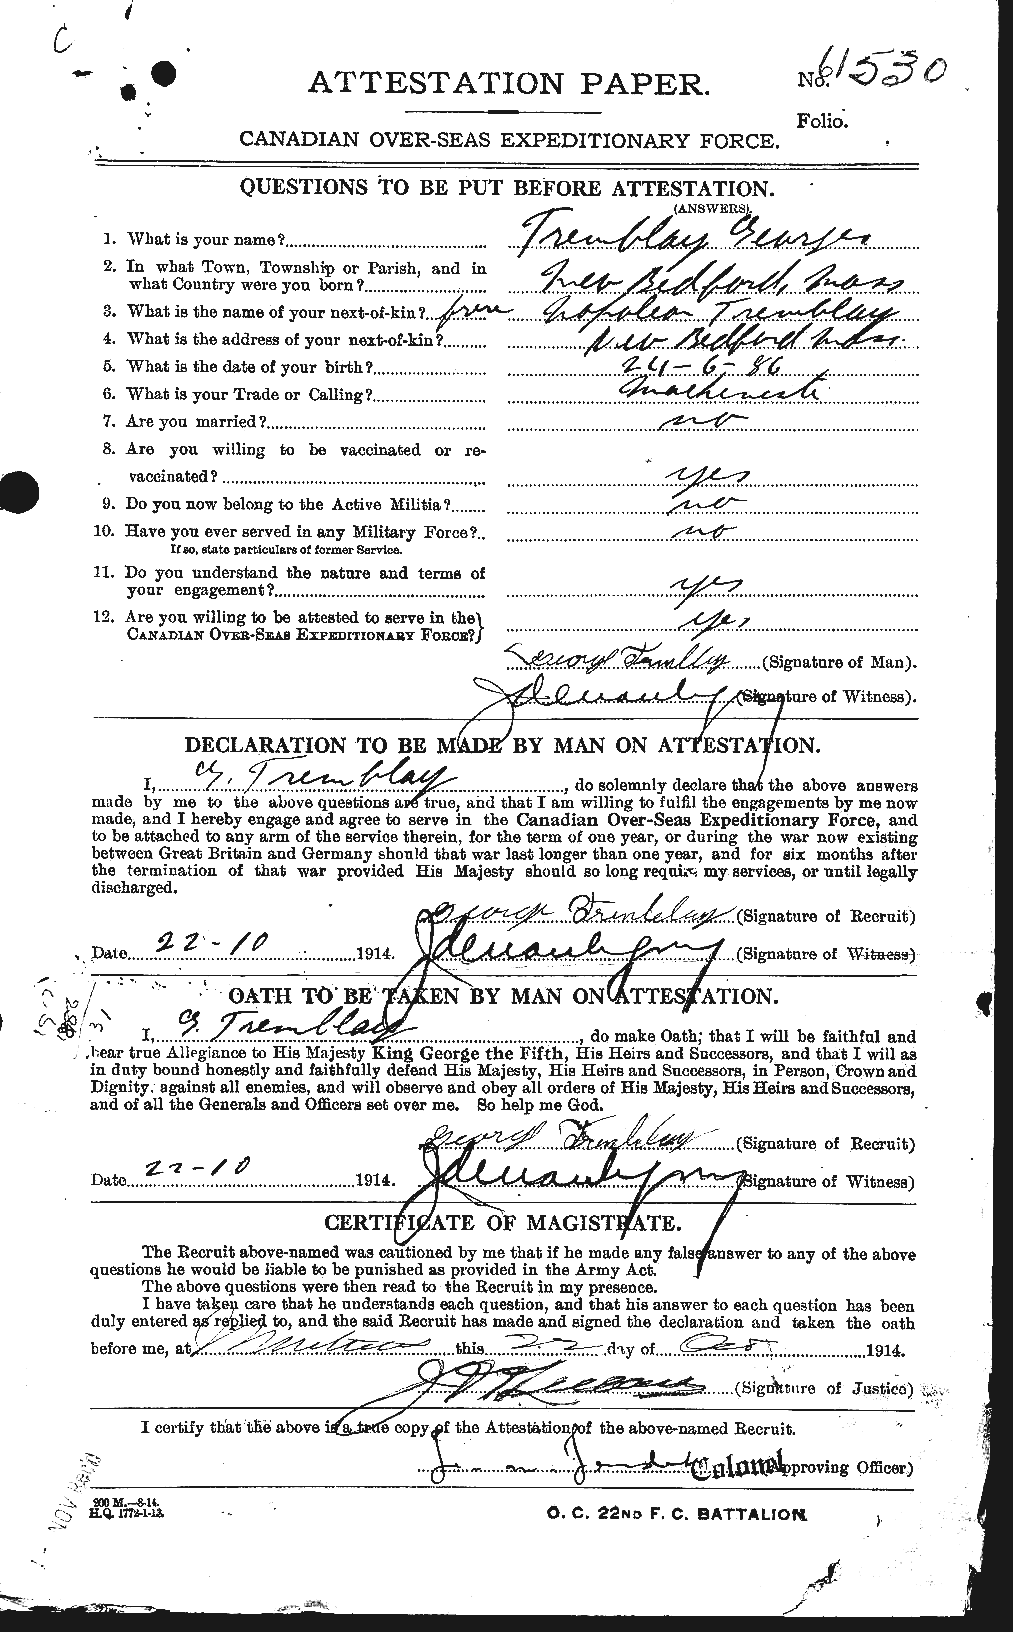 Personnel Records of the First World War - CEF 639060a